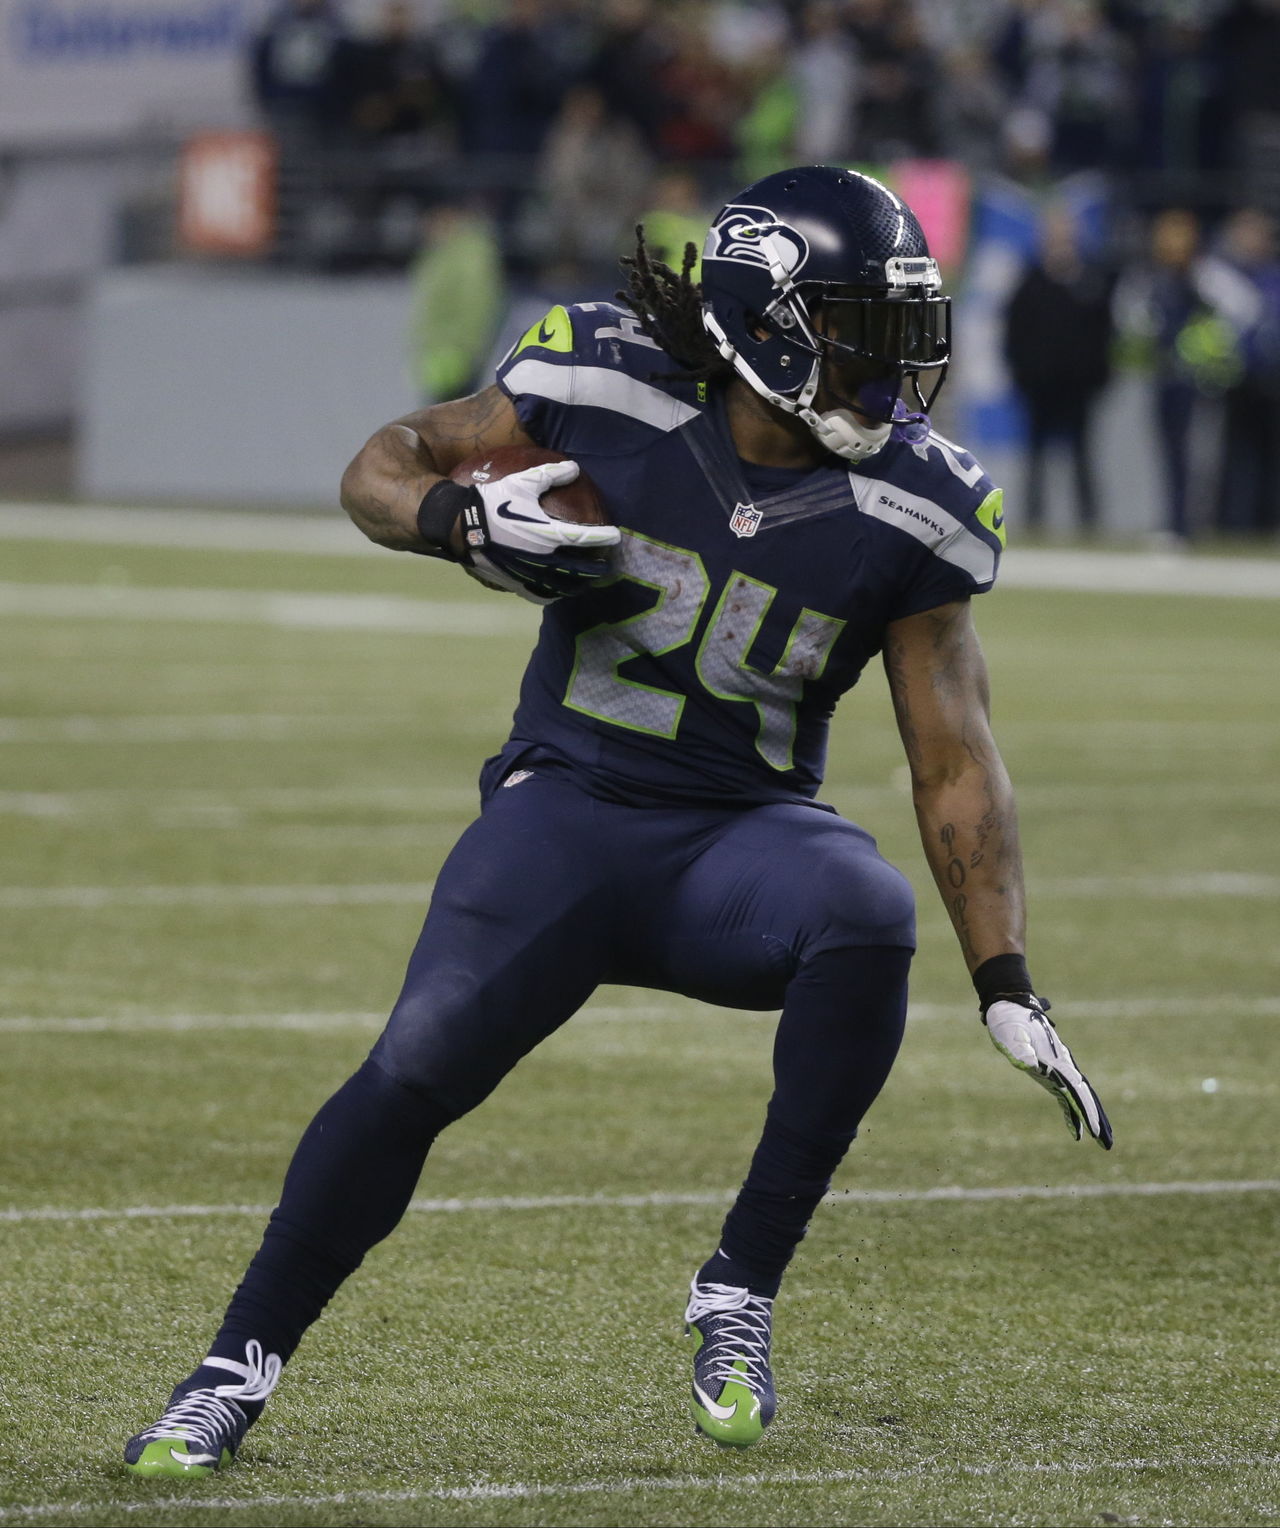 Seahawks running back Marshawn Lynch rushes against the Cardinals during a game on Nov. 15 in Seattle.